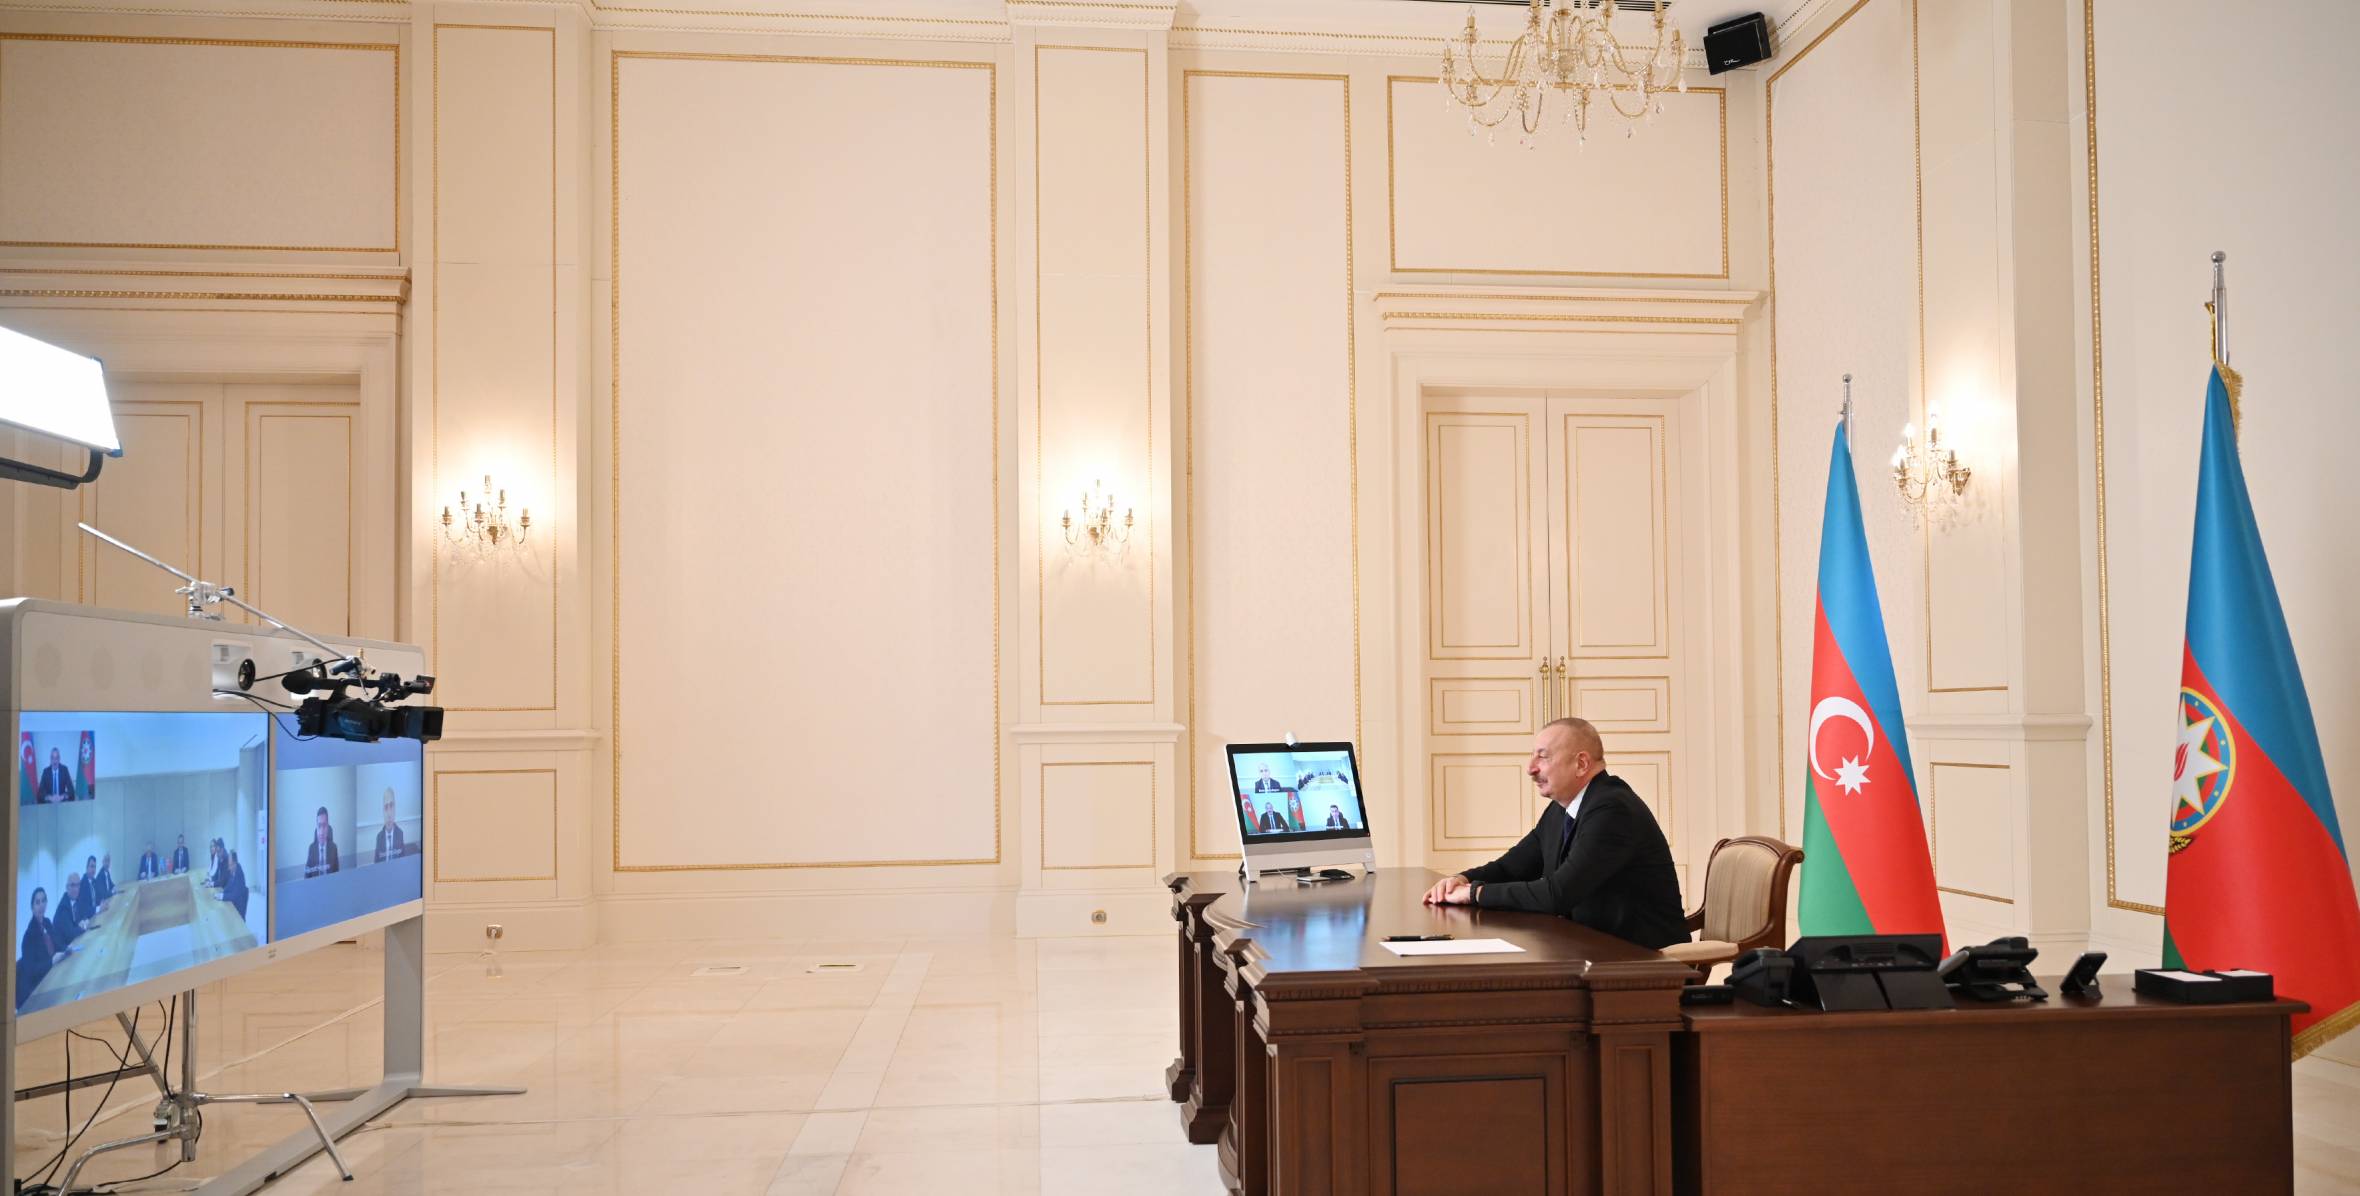 Ilham Aliyev received Minister of National Education of Turkiye and a group of members of GNAT in format of video conference